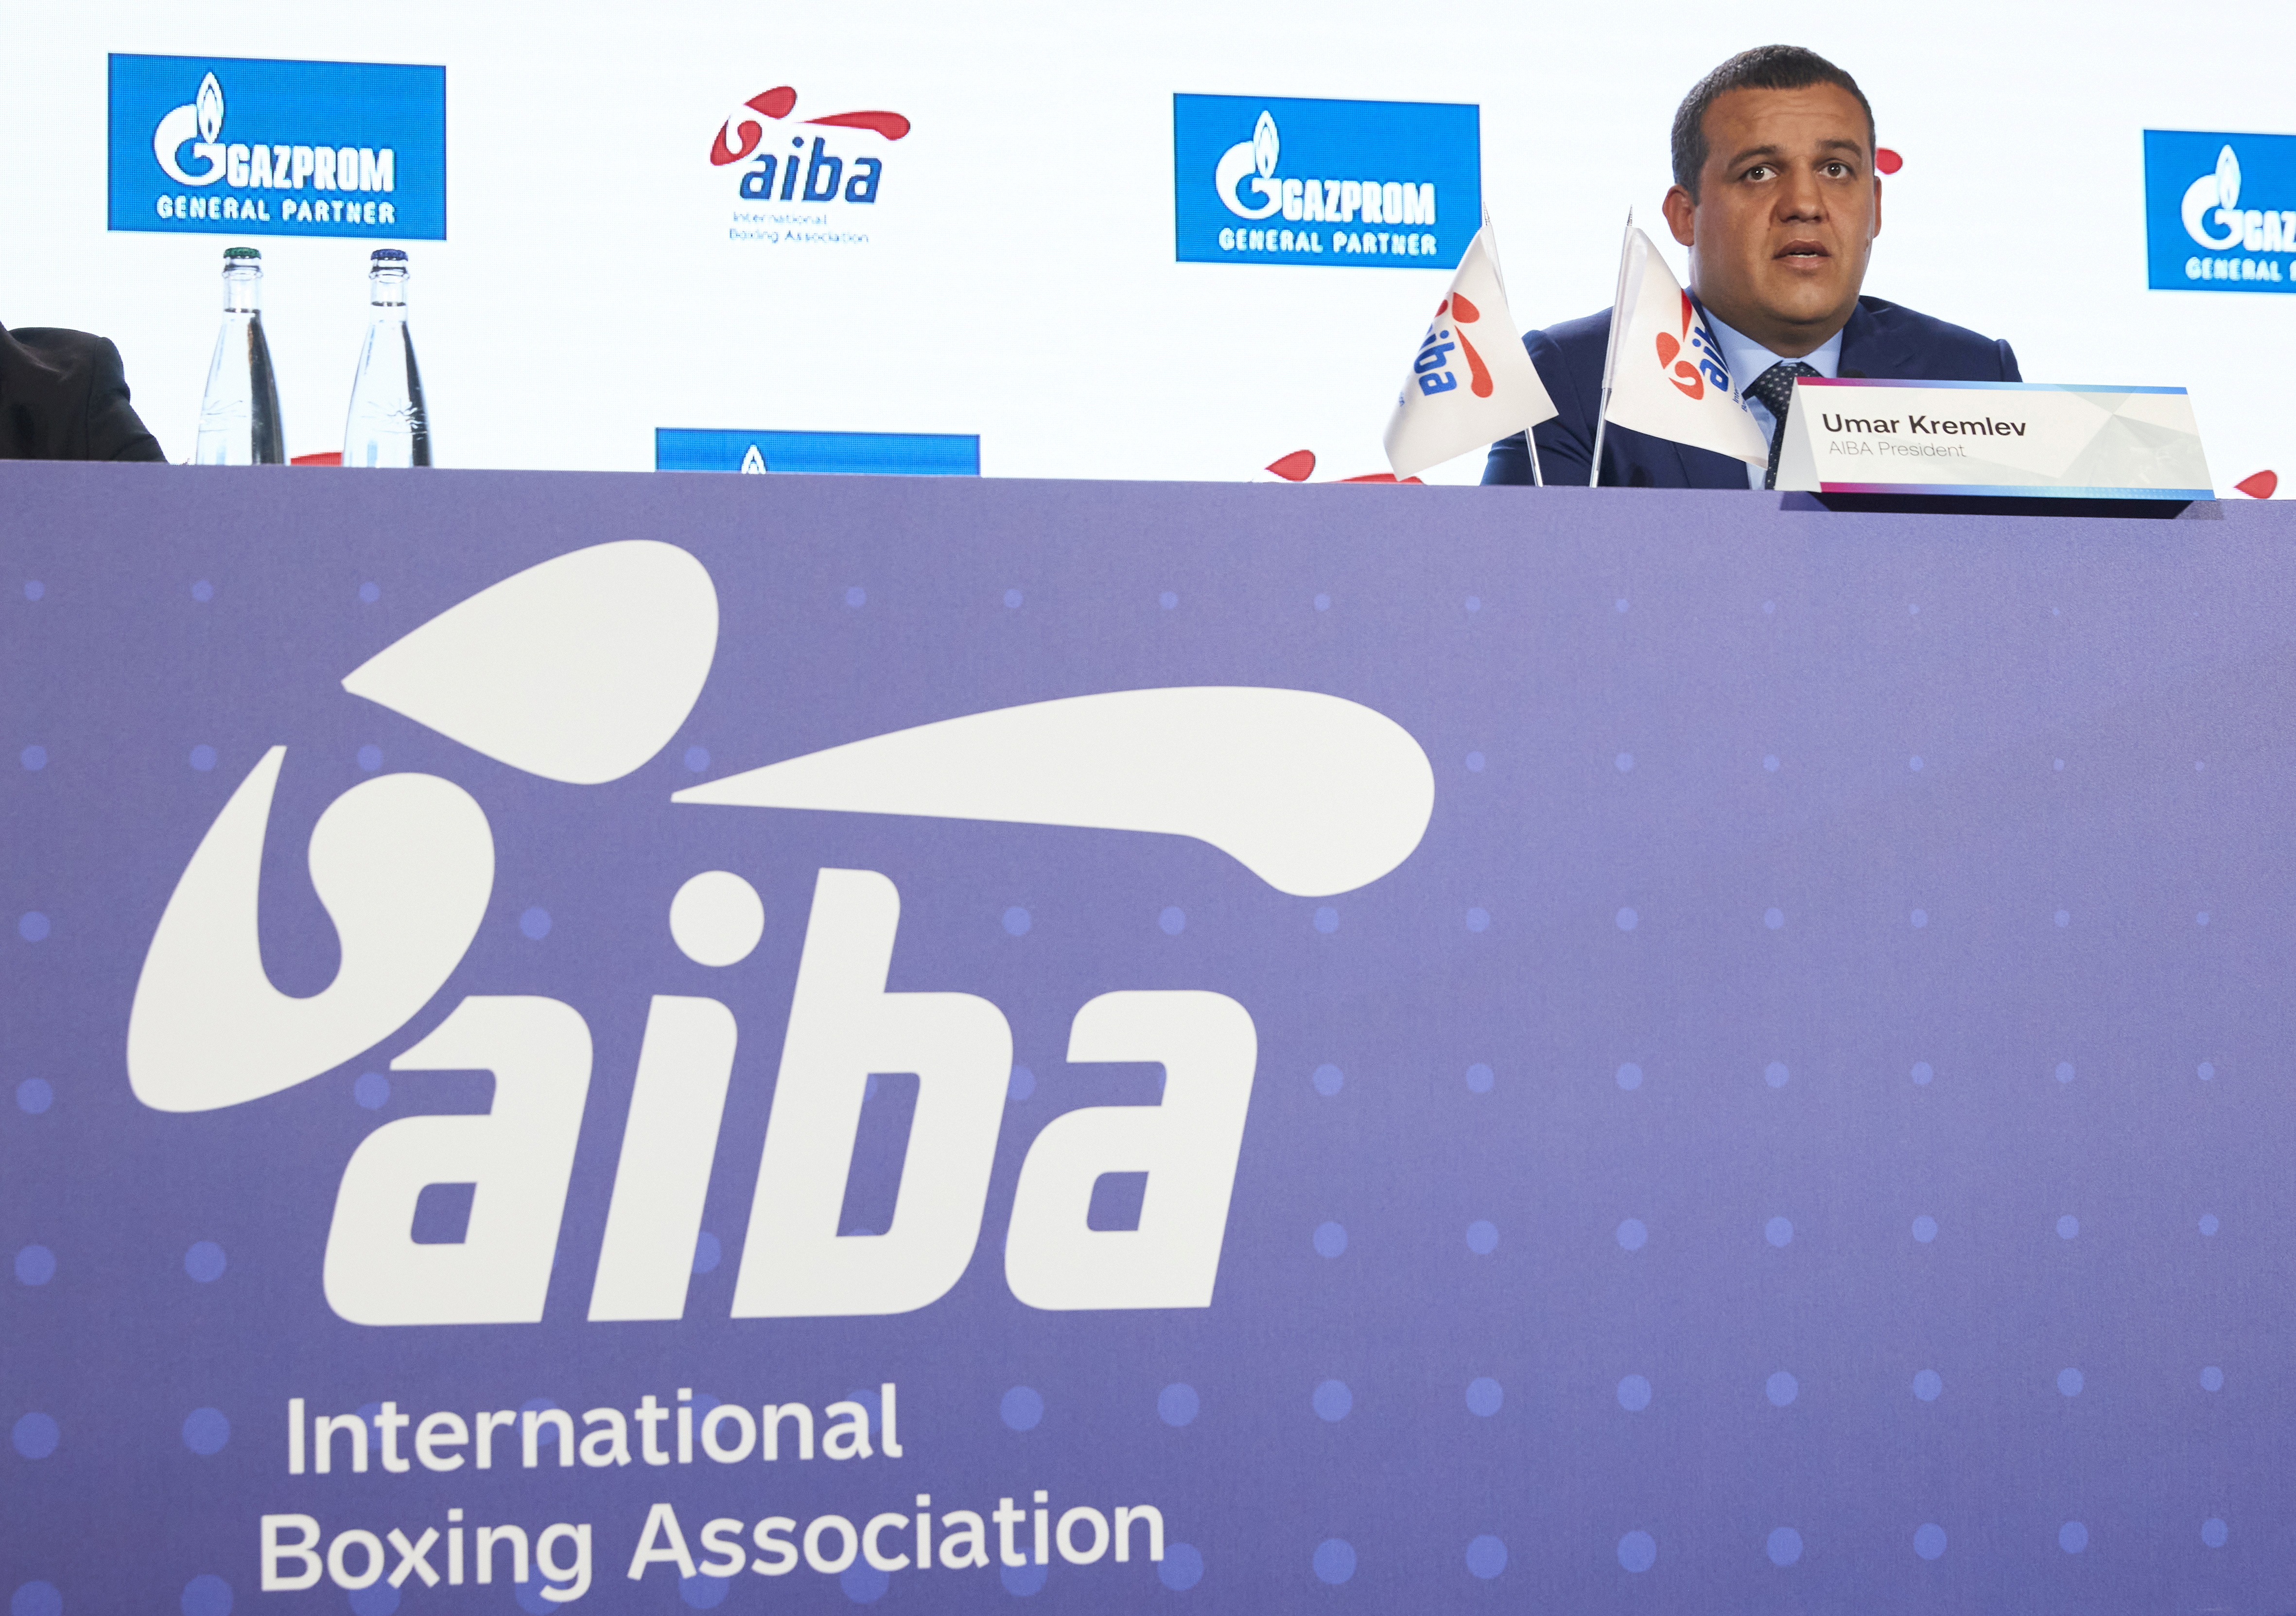 AIBA embraces reform and fair play for boxing ahead of Paris 2024